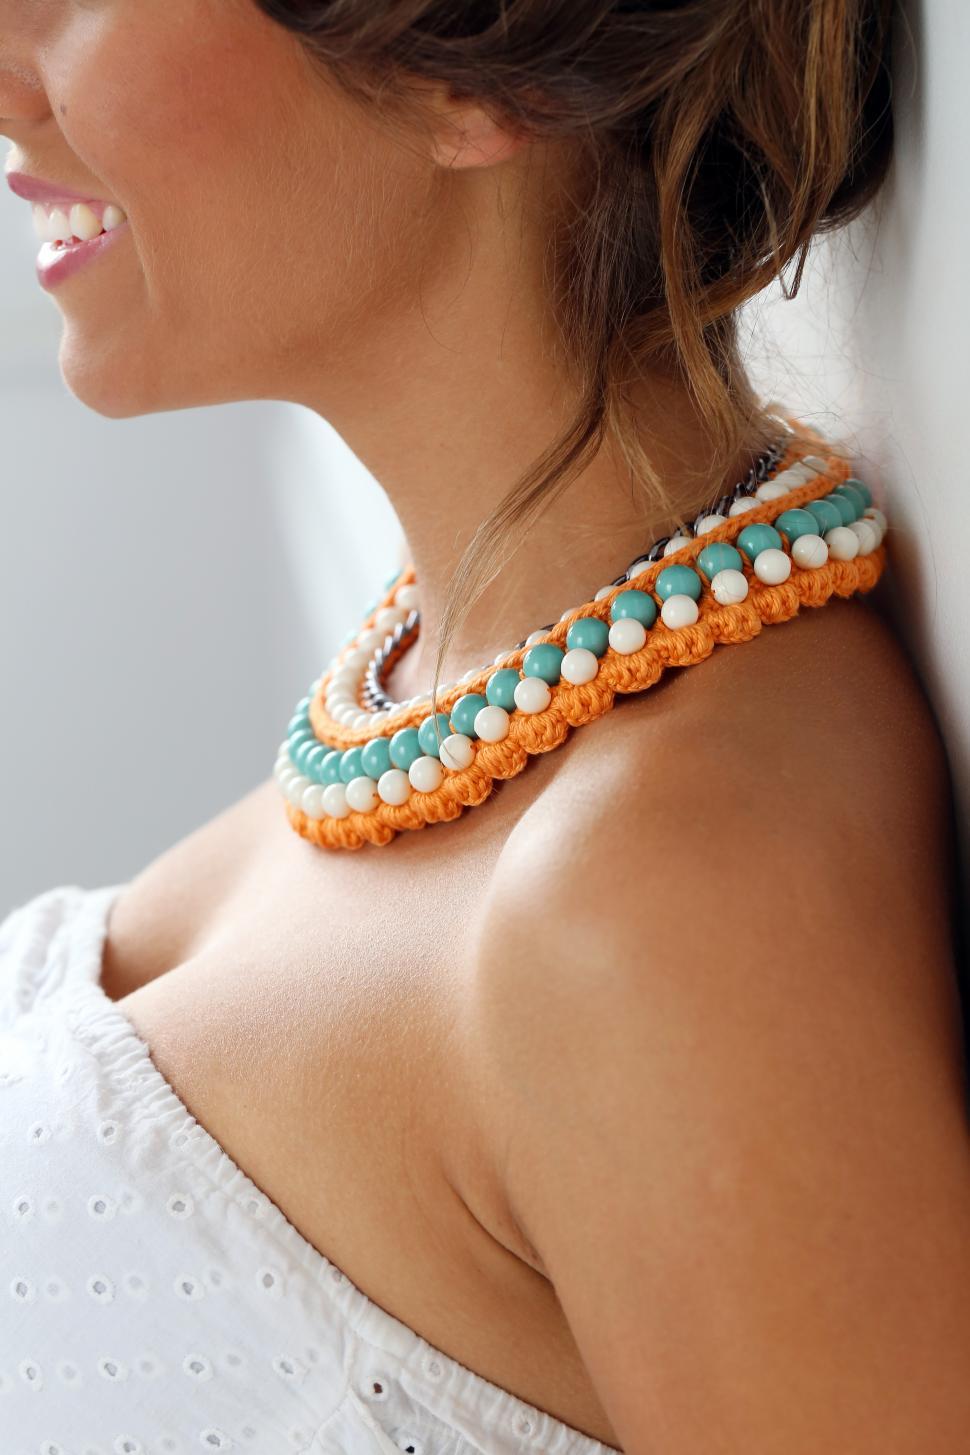 Free Image of Necklace on a woman 